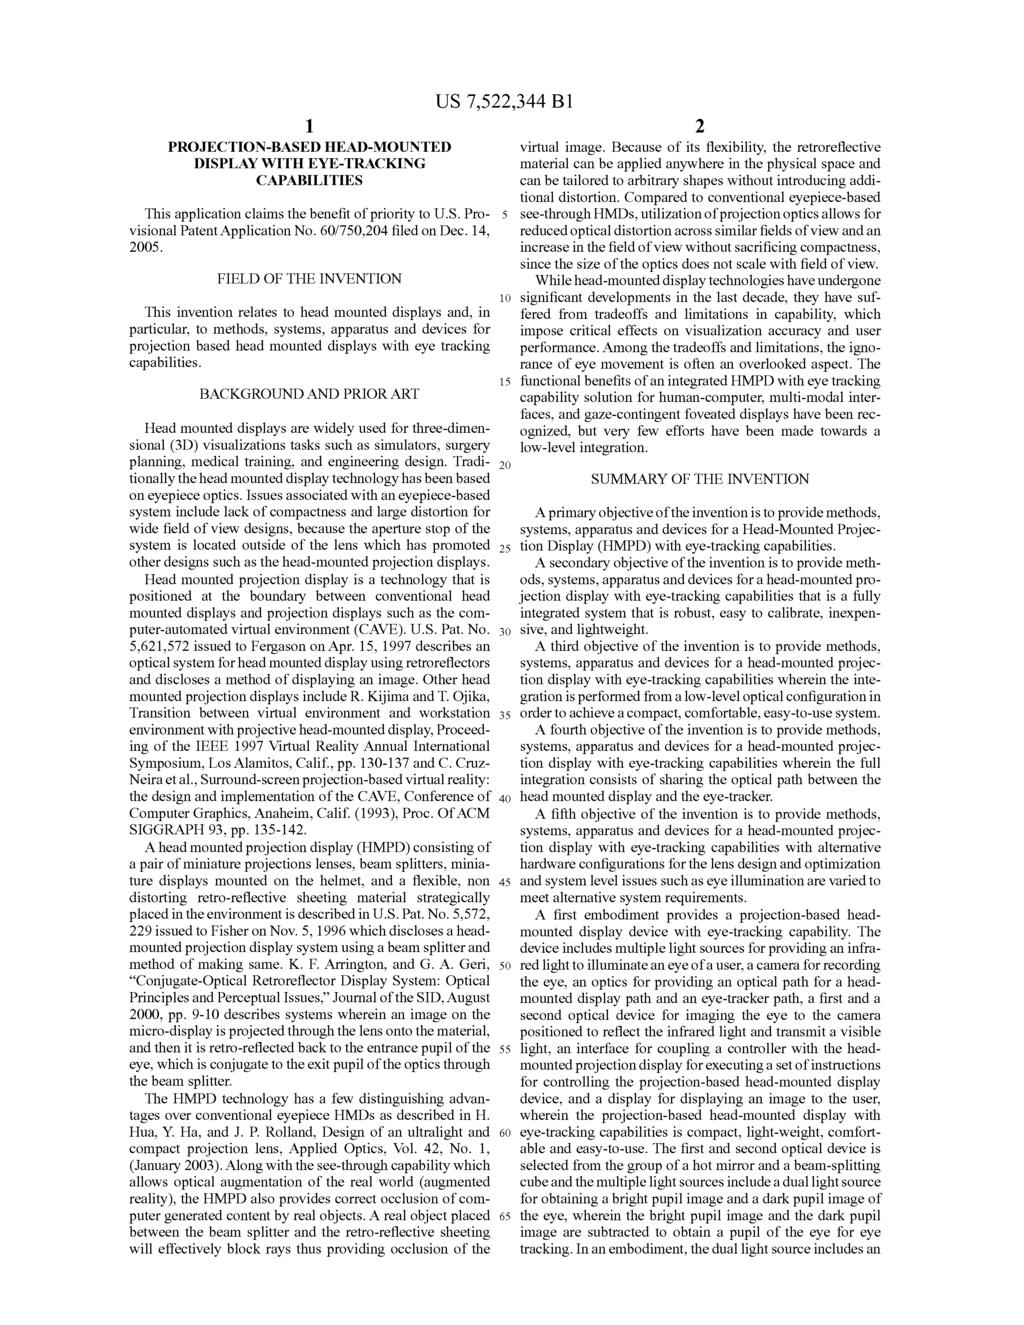 1 PROJECTION-BASED HEAD-MOUNTED DISPLAY WITH EYE-TRACKING CAPABILITIES This application claims the benefit of priority to U.S. Provisional Patent Application No. 60/750,204 filed on Dec. 14, 2005.